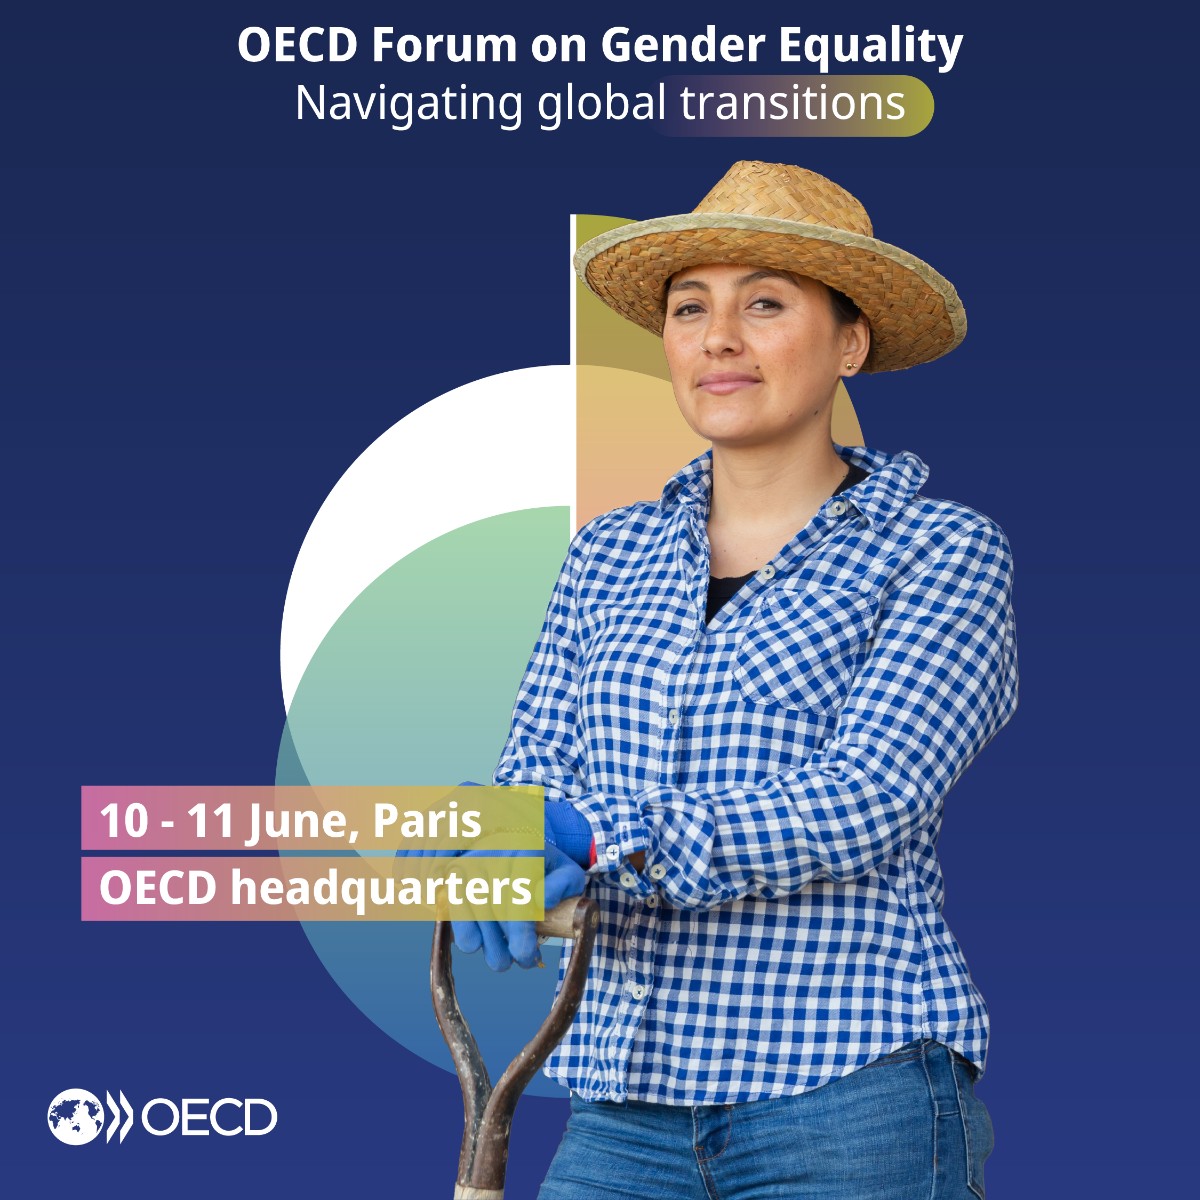 Climate change isn't just an environmental issue, it's also a gender issue. Women in developing countries face disproportionate impacts due to unequal access to land and natural resources. Join the #OECDgender Forum to learn more ➡️ brnw.ch/21wKcn7